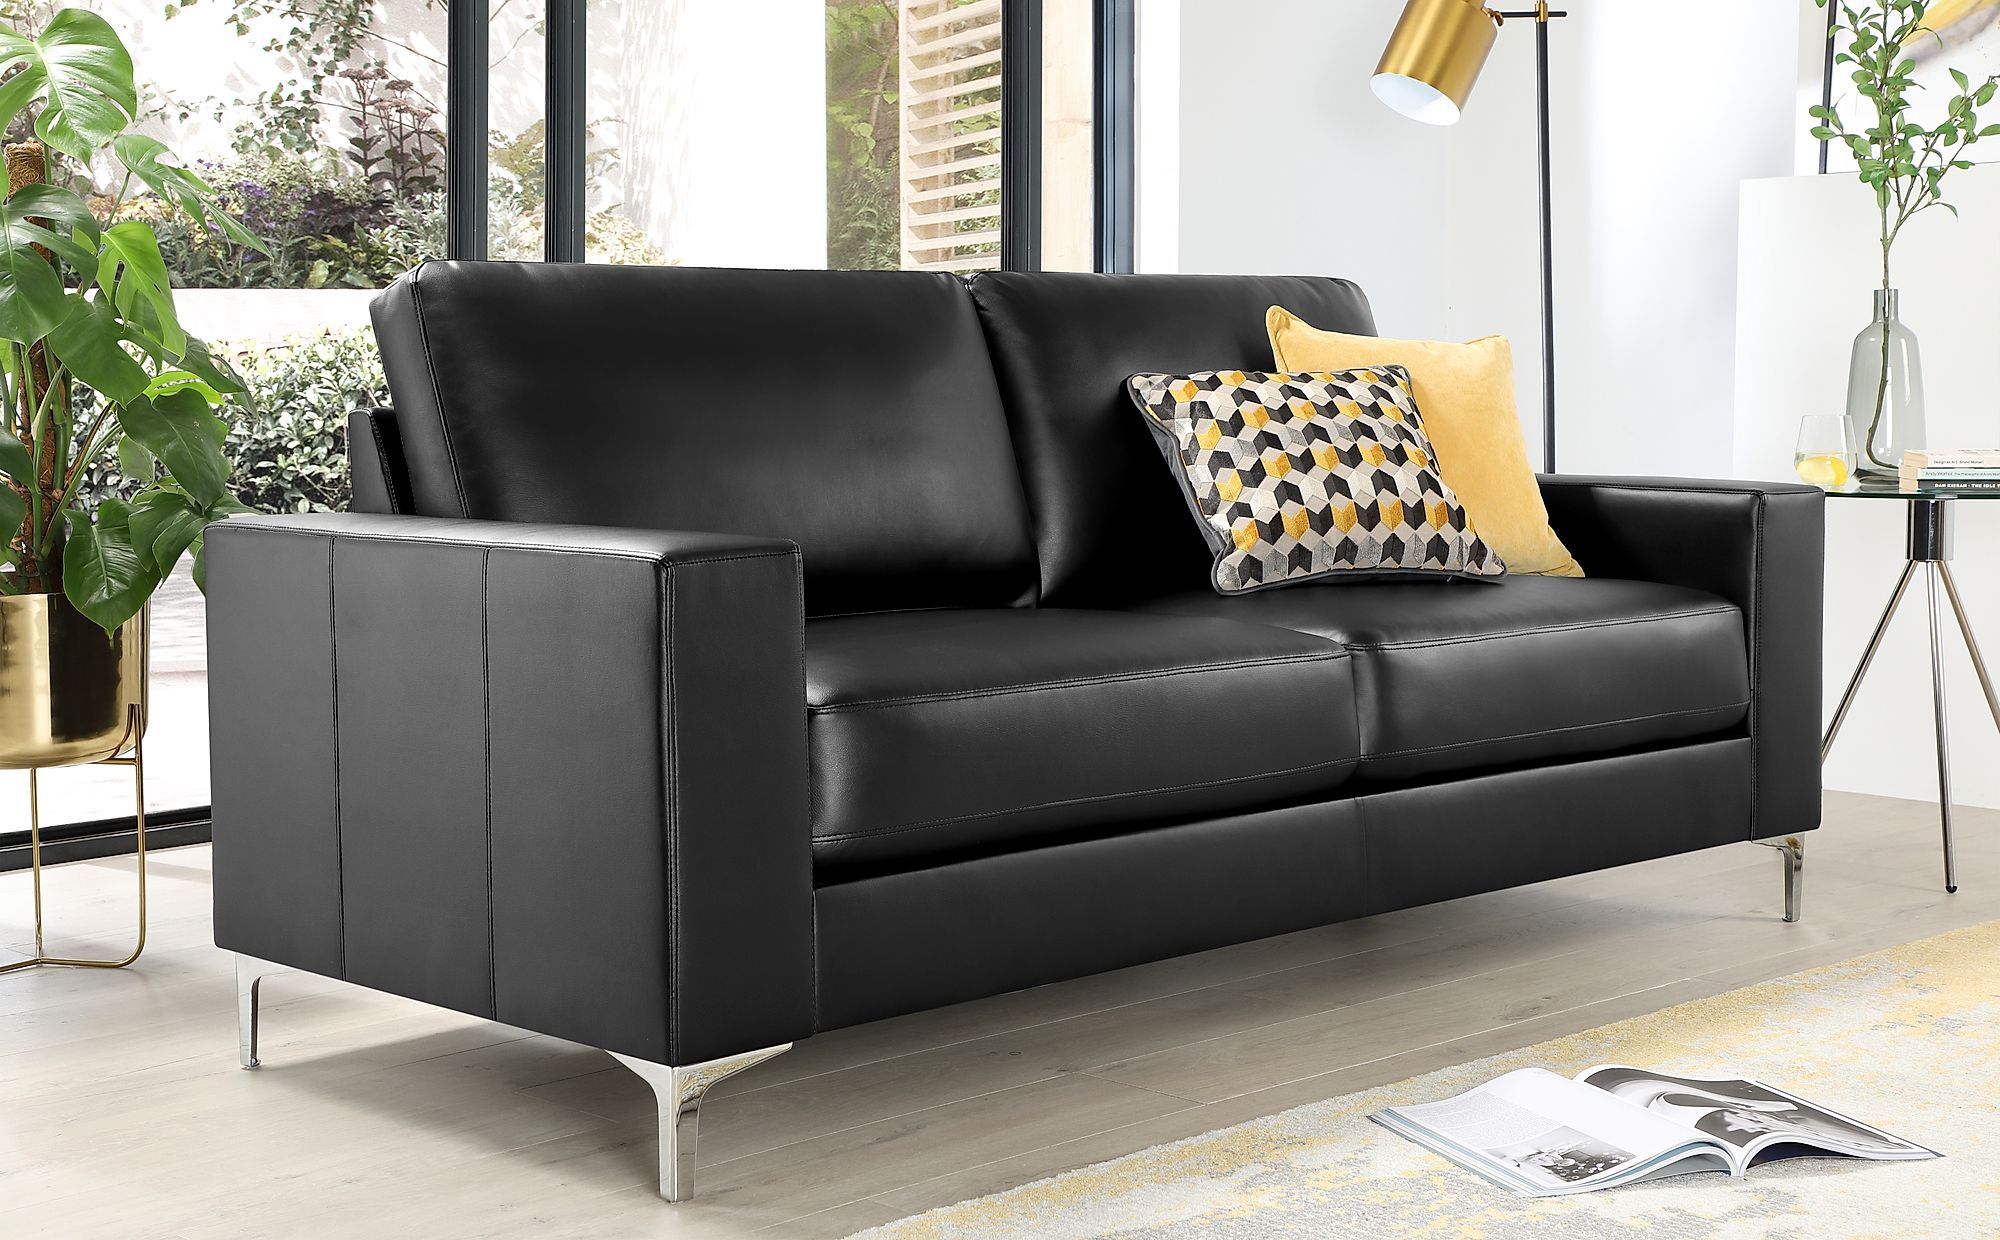 Baltimore Black Leather 3 Seater Sofa | Furniture Choice Within Sofas In Black (Gallery 3 of 20)